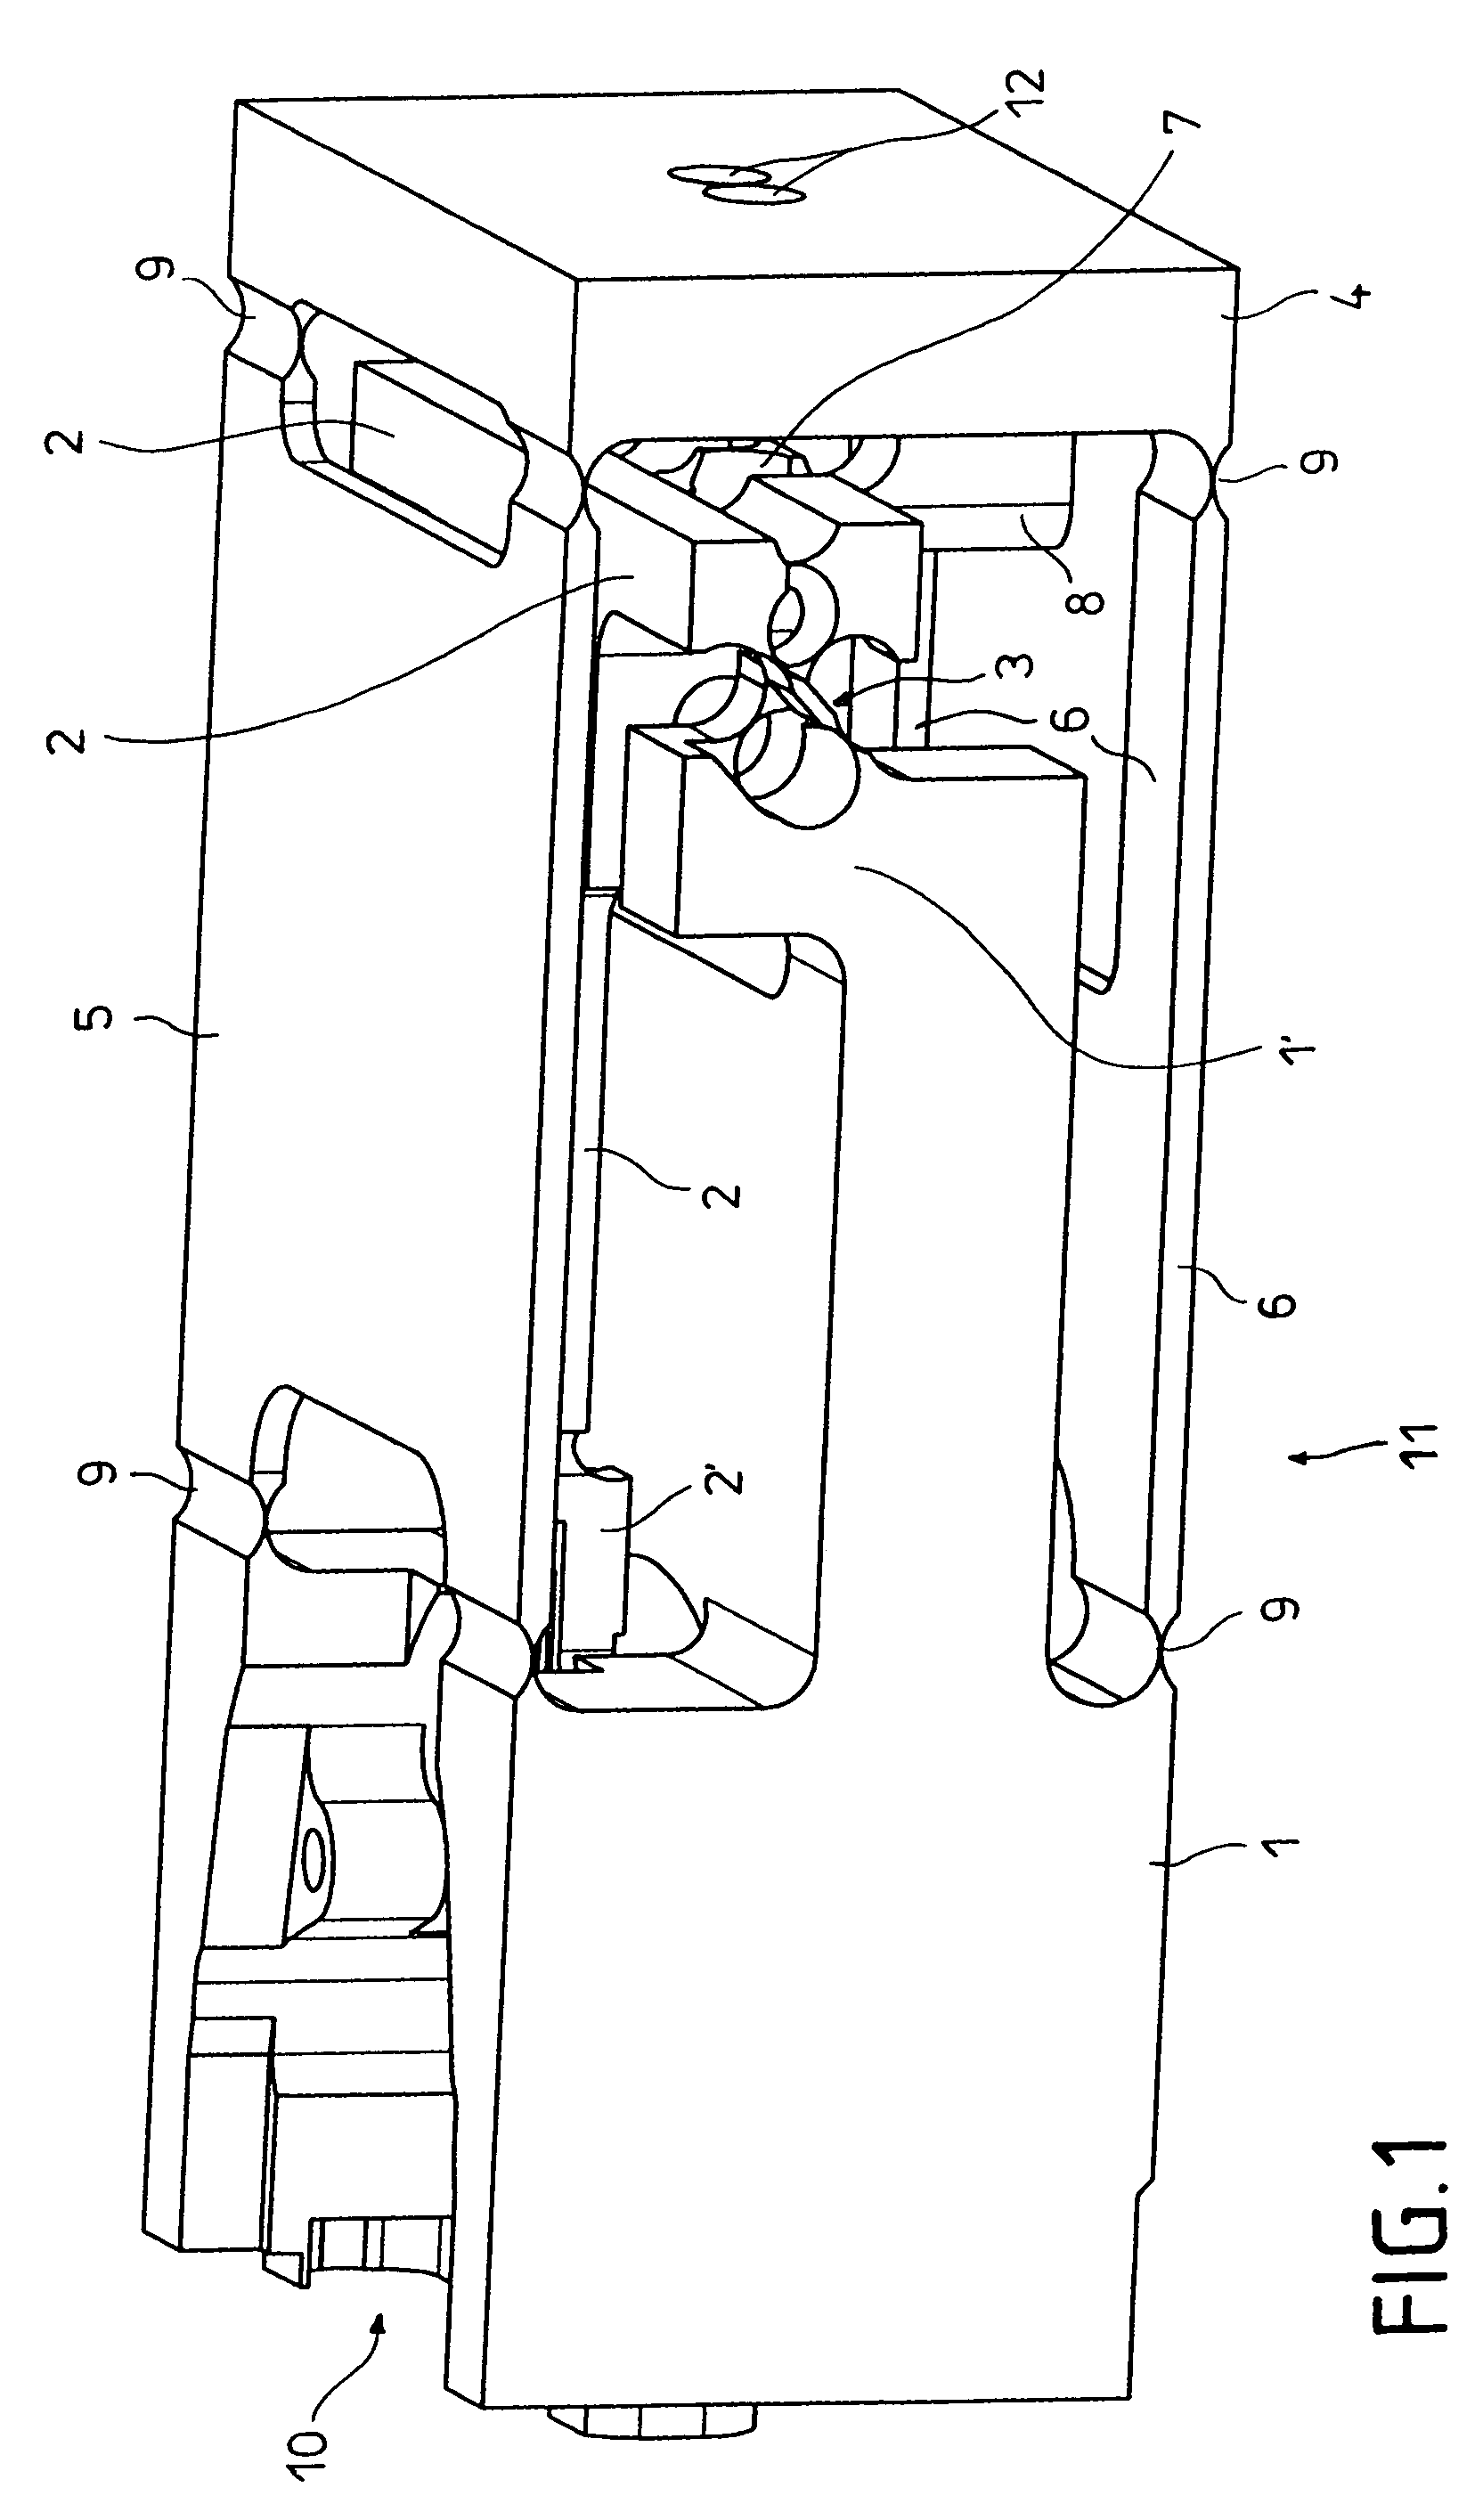 Weighing system of monolithic construction including flexural pivot